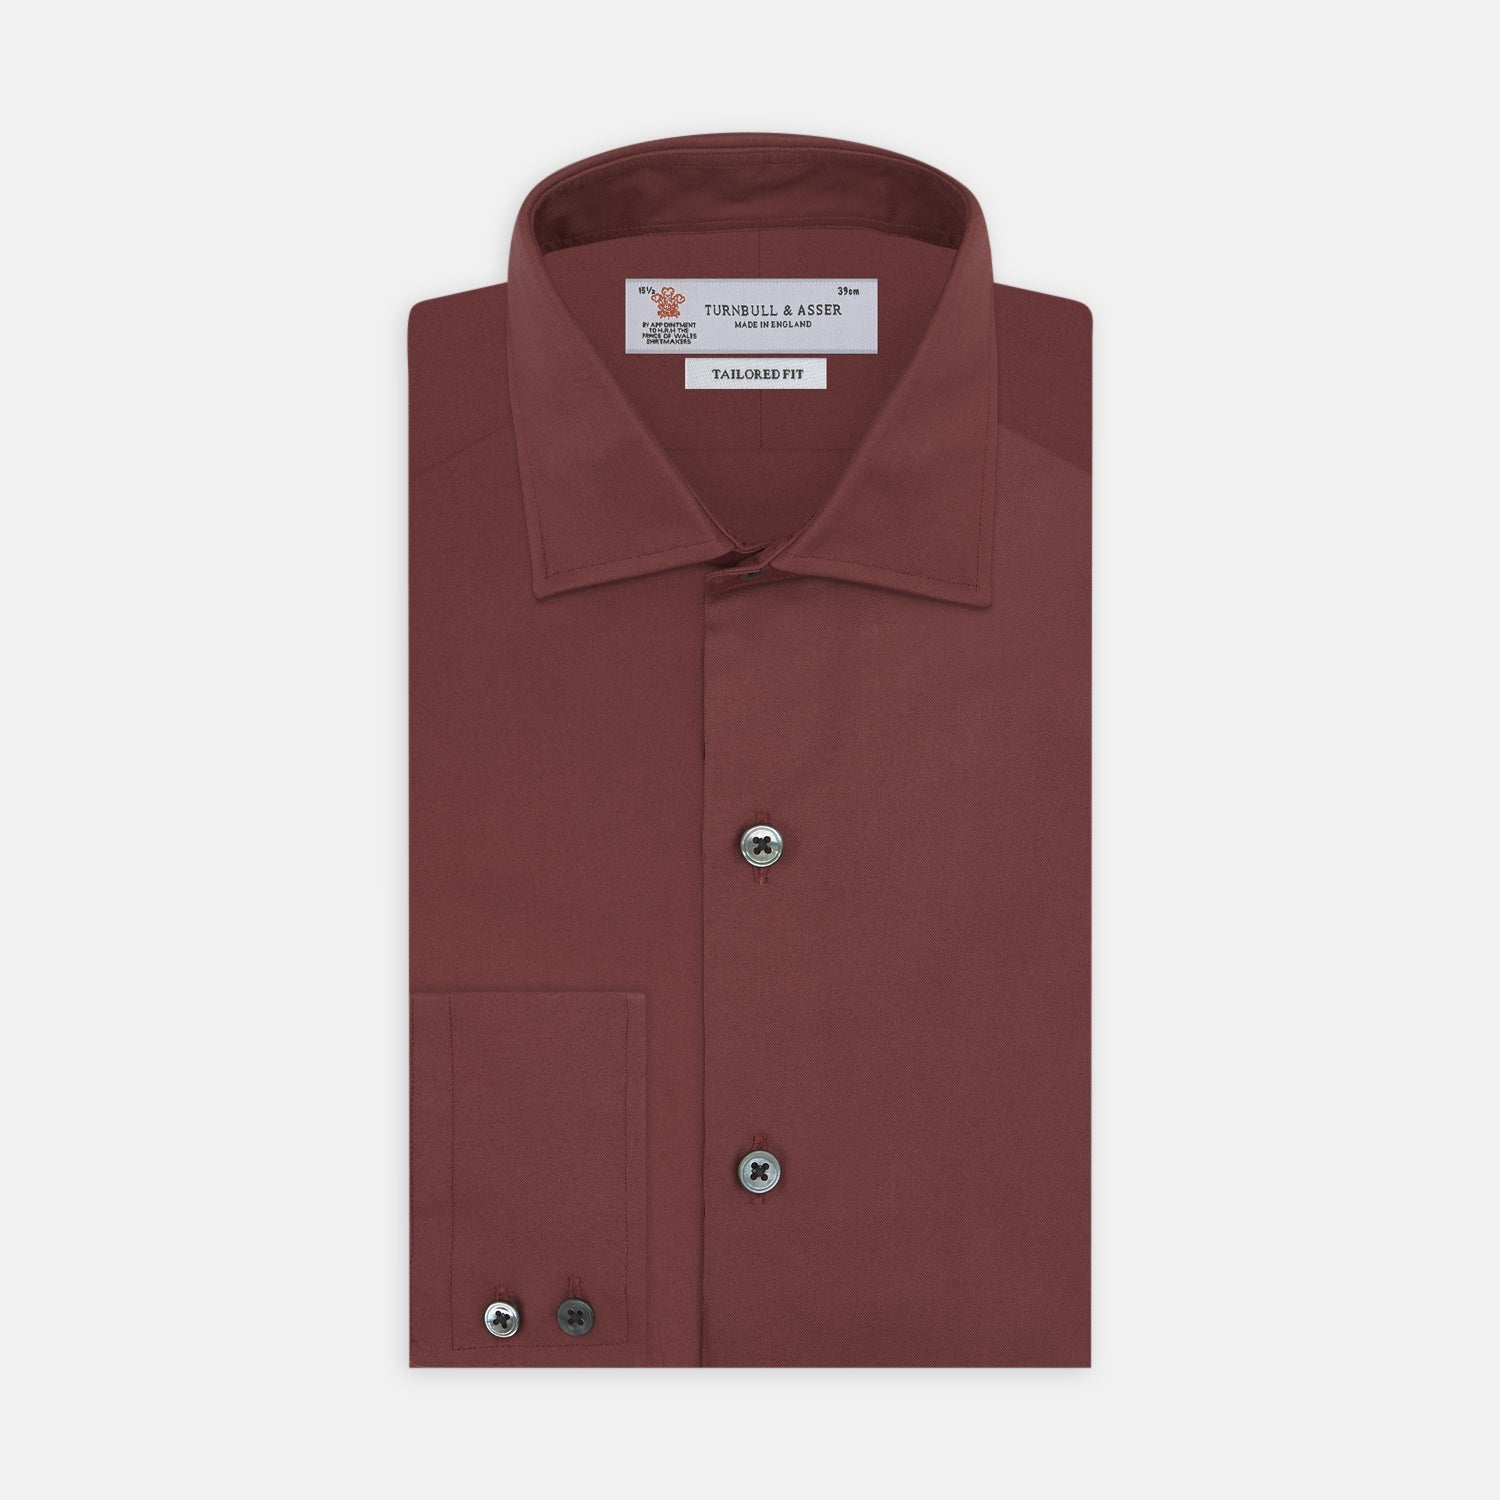 Tailored Fit Burgundy Cotton Shirt with Kent Collar and 2-Button Cuffs